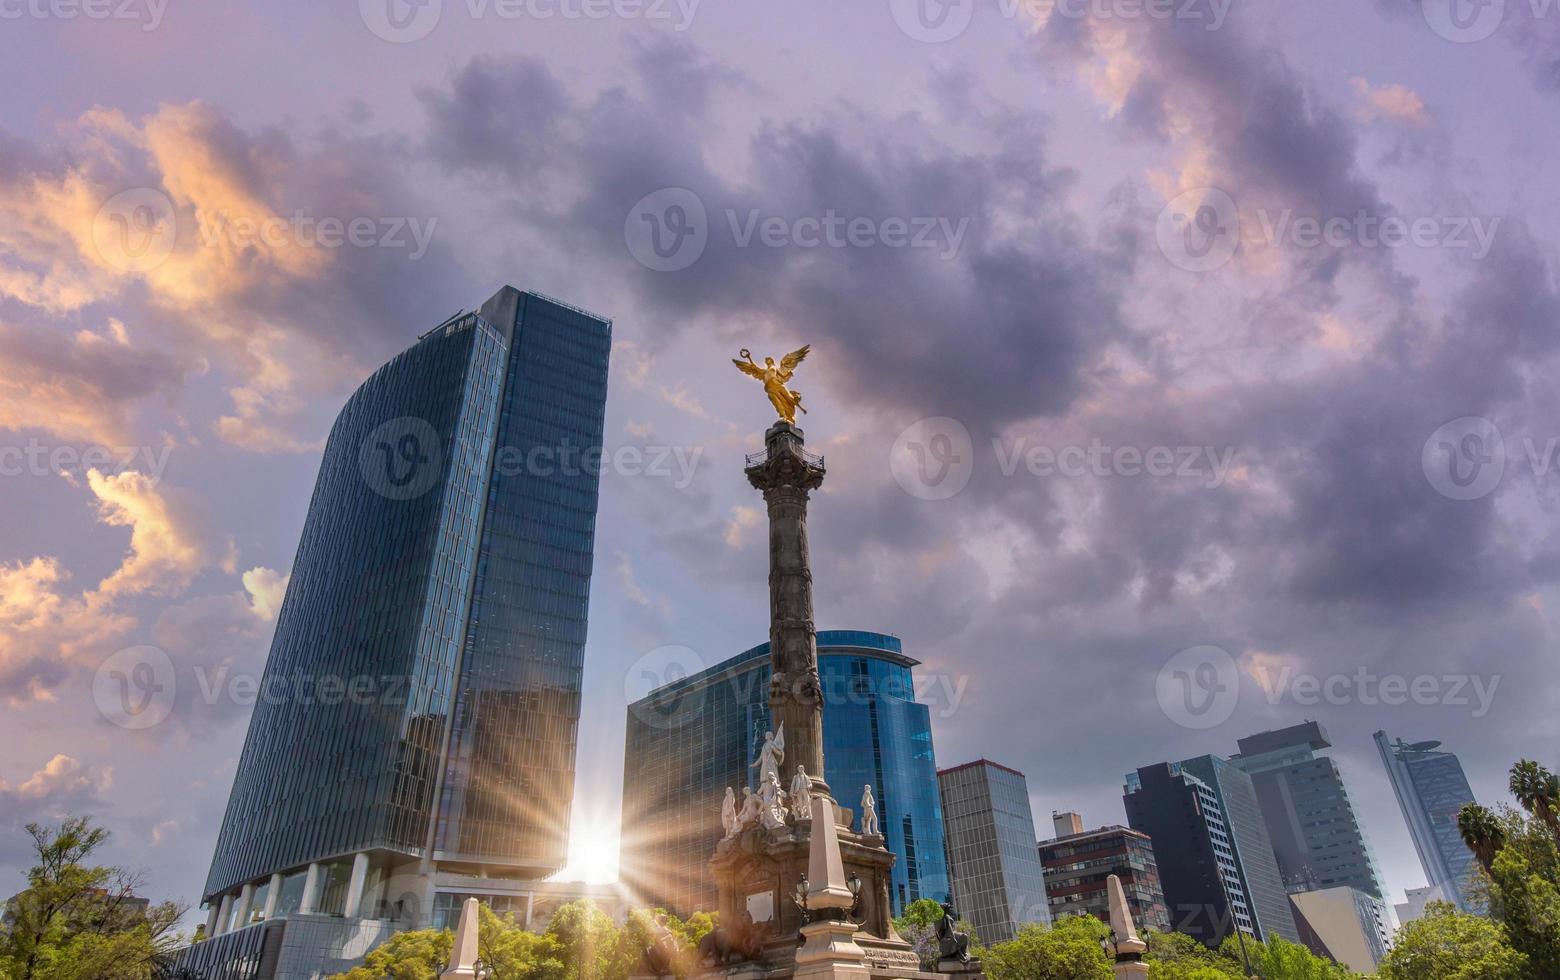 Angel of Independence monument located on Reforma Street near historic center of Mexico City photo